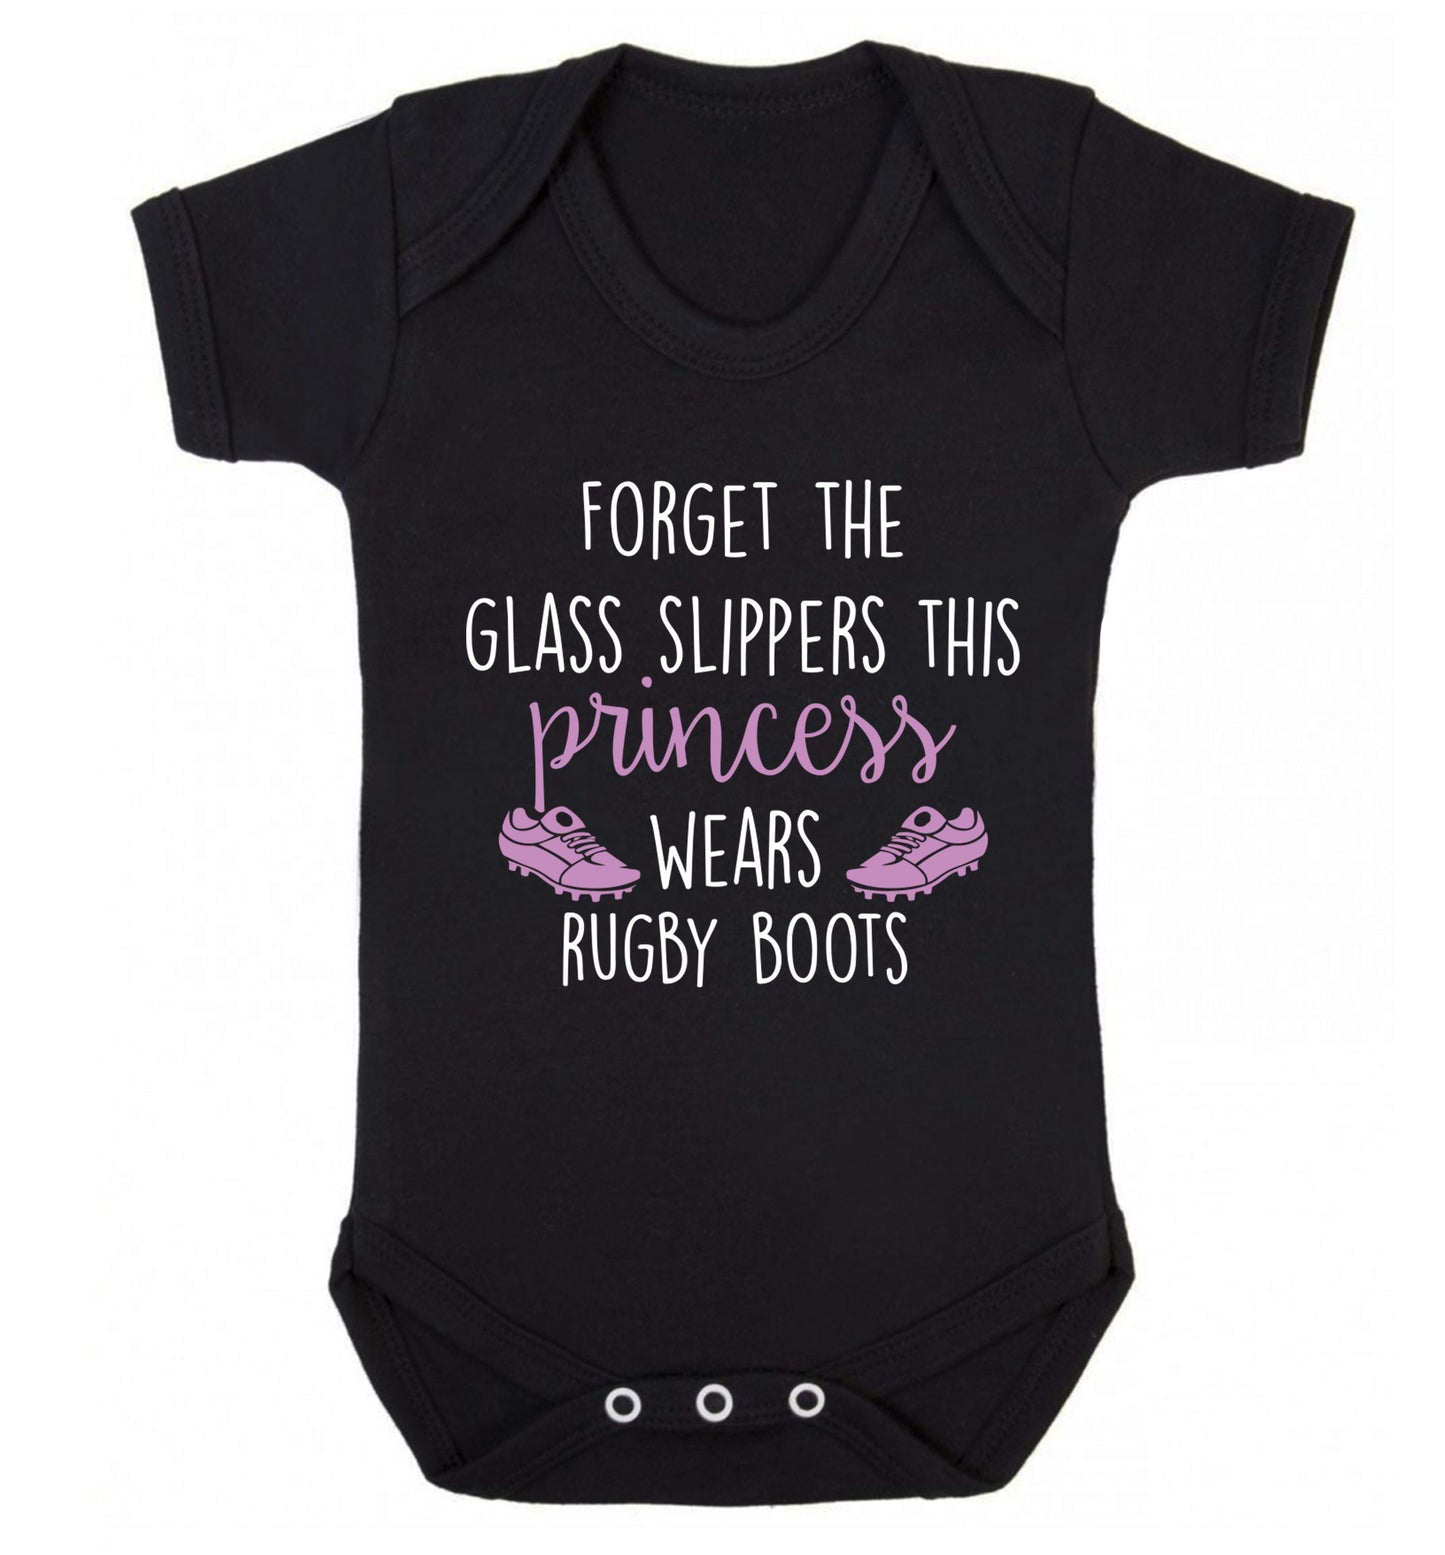 Forget the glass slippers this princess wears rugby boots Baby Vest black 18-24 months